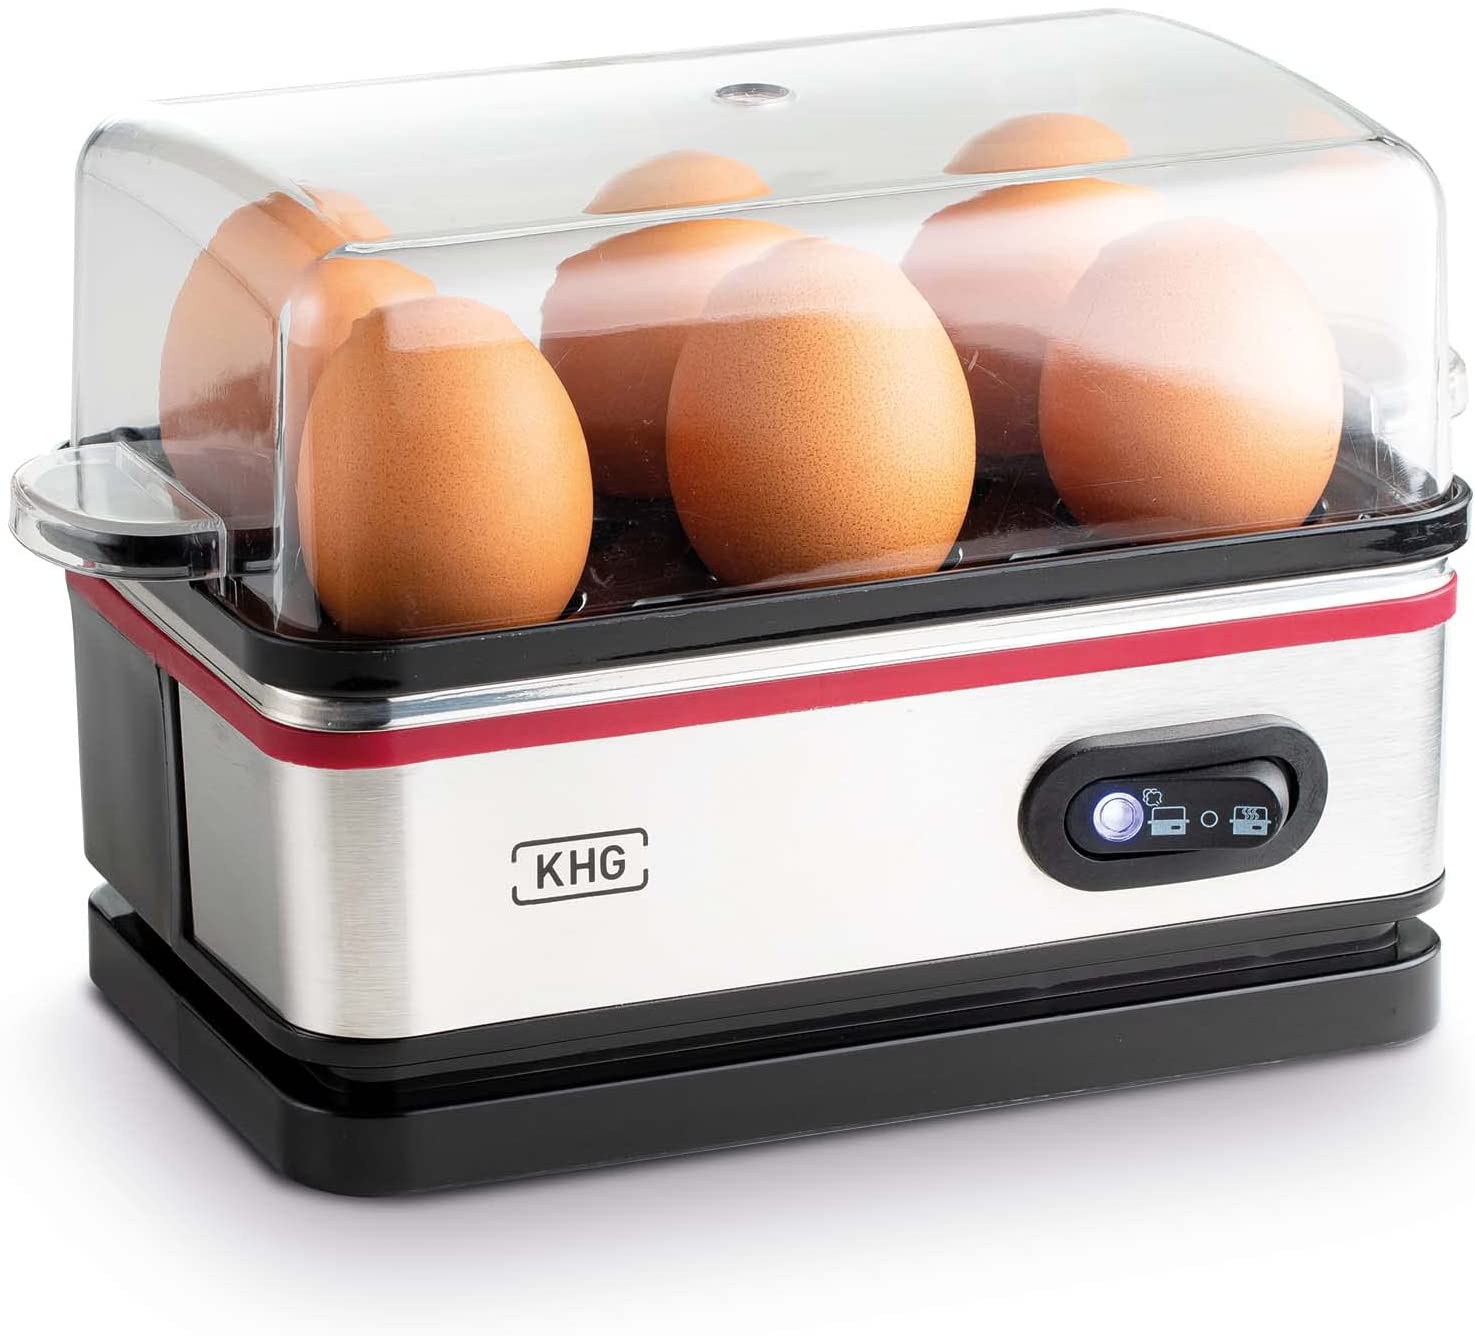 KHG EK-600SE 6 Egg Cooker Stainless Steel Lightweight with Keep Warm Function in Retro Design Easy Operation with Alarm Function and Measuring Cup 400 Watt